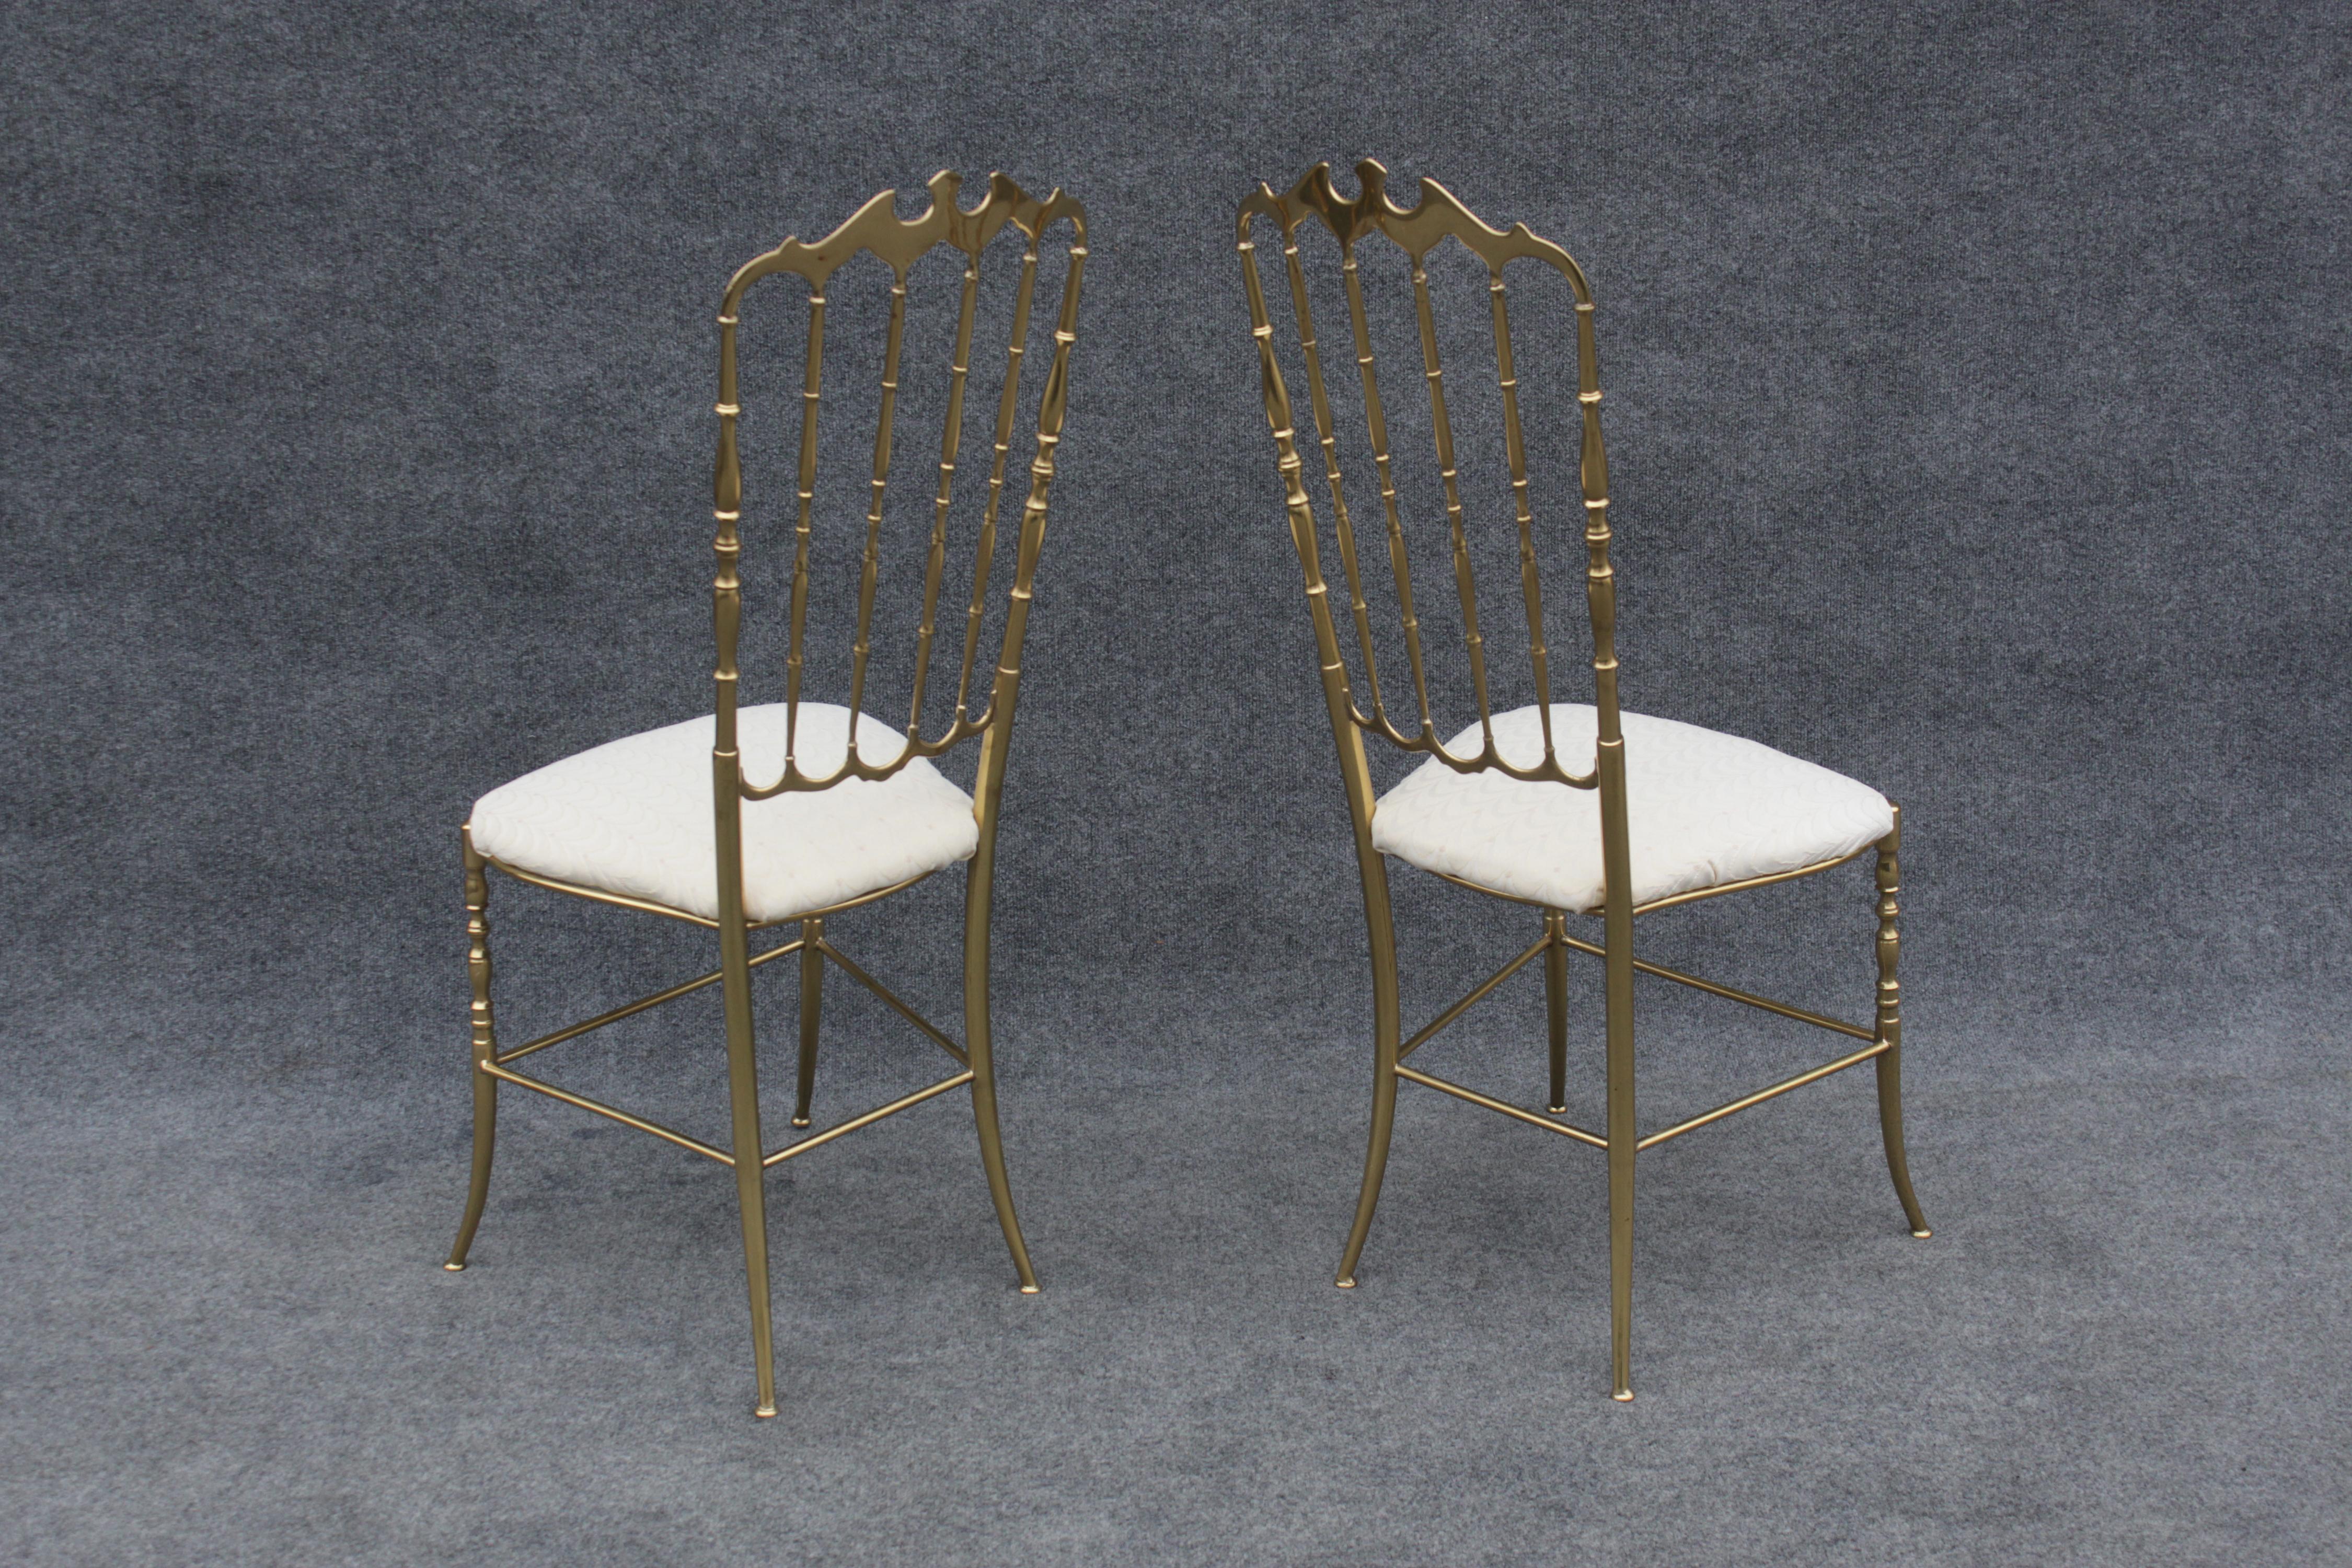 Pair of Solid Brass & White Upholstered Dining or Side Chairs by Chiavari Italy For Sale 3